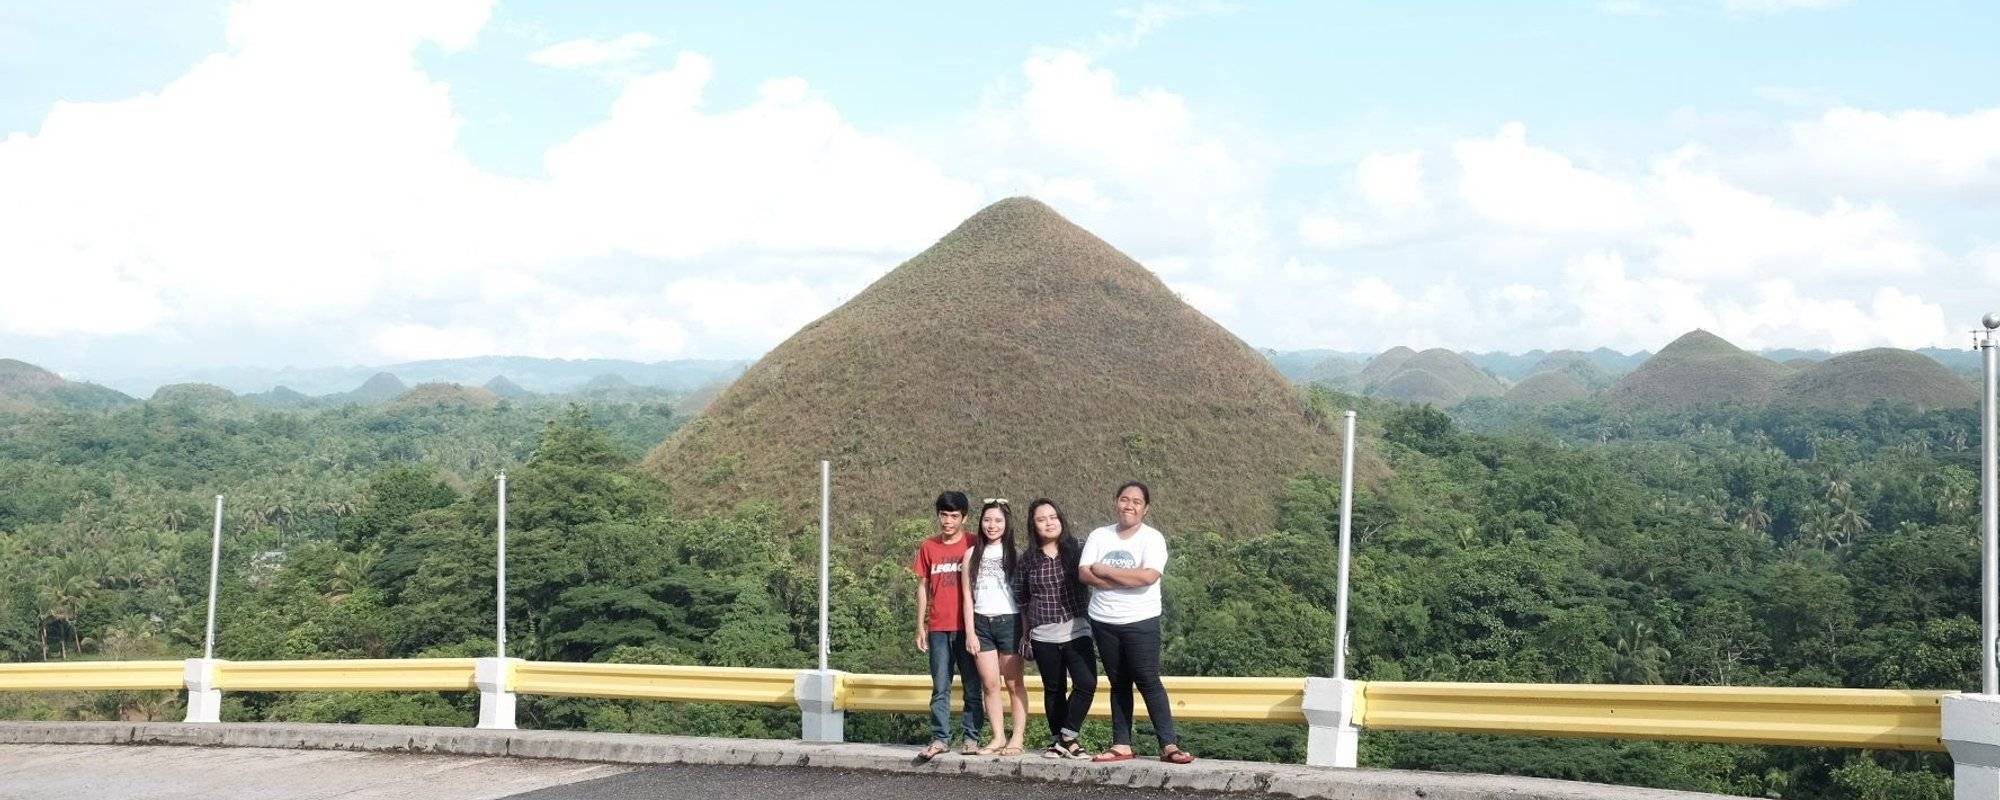 Kim's Quest #36: Journey to the Chocolate Hills of Bohol